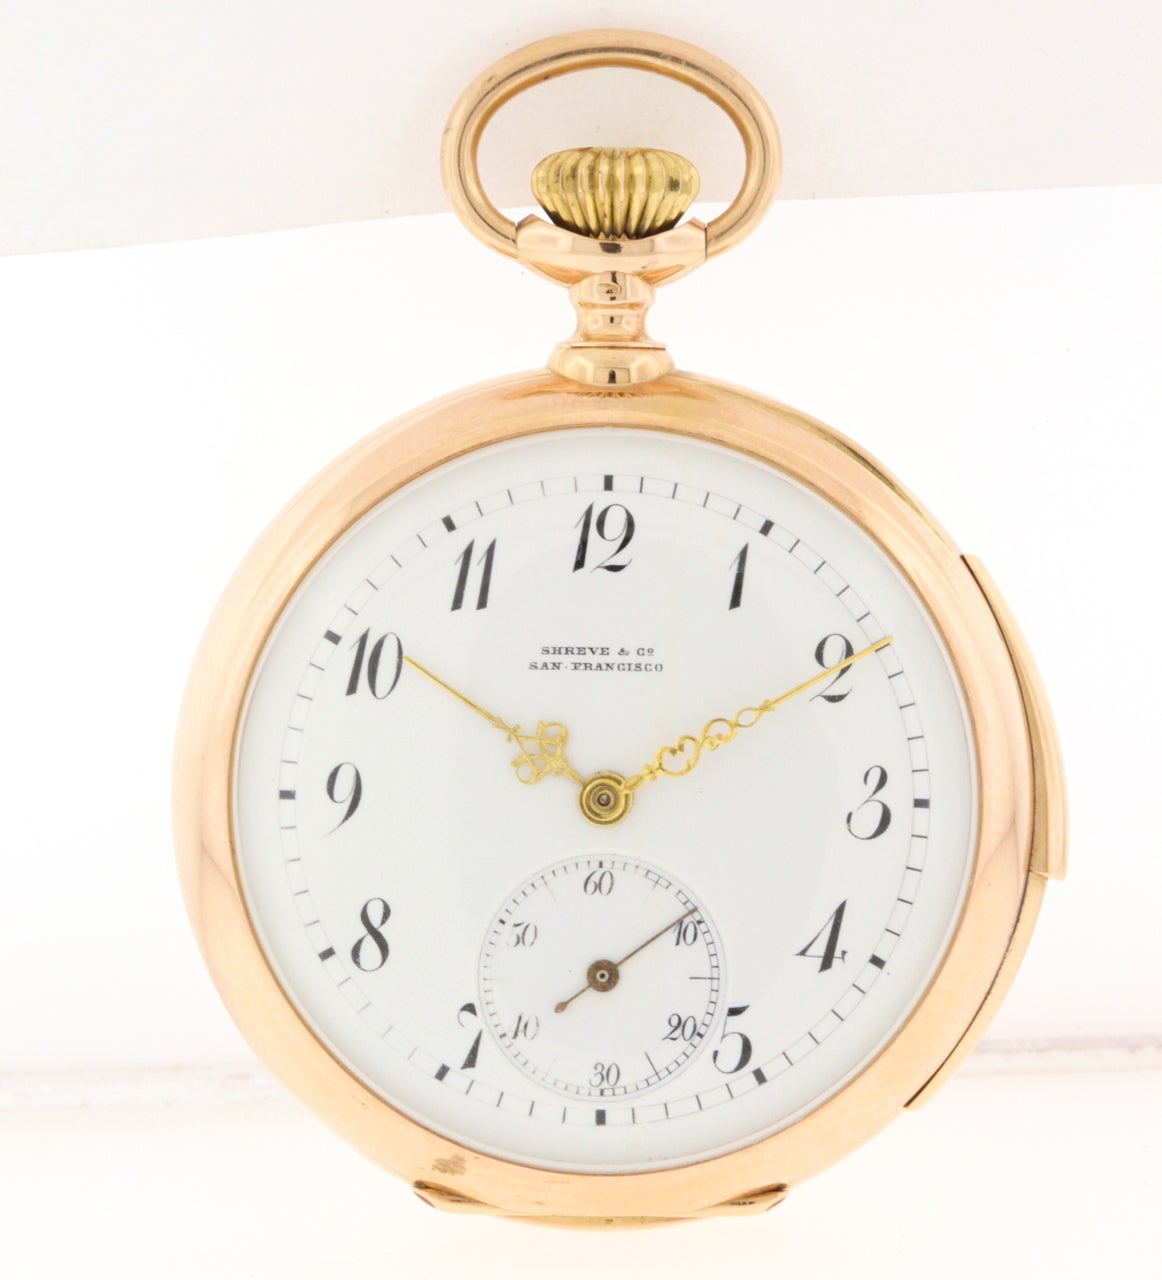 18K yellow gold minute repeating pocket watch, circa 1900 made for retailer Shreve & Co. by Ulysse Nardin, Le Locle, Switzerland. 

18k yellow gold 49mm polished case with hinged gold cuvette, back monogram with crown design, white enamel dial